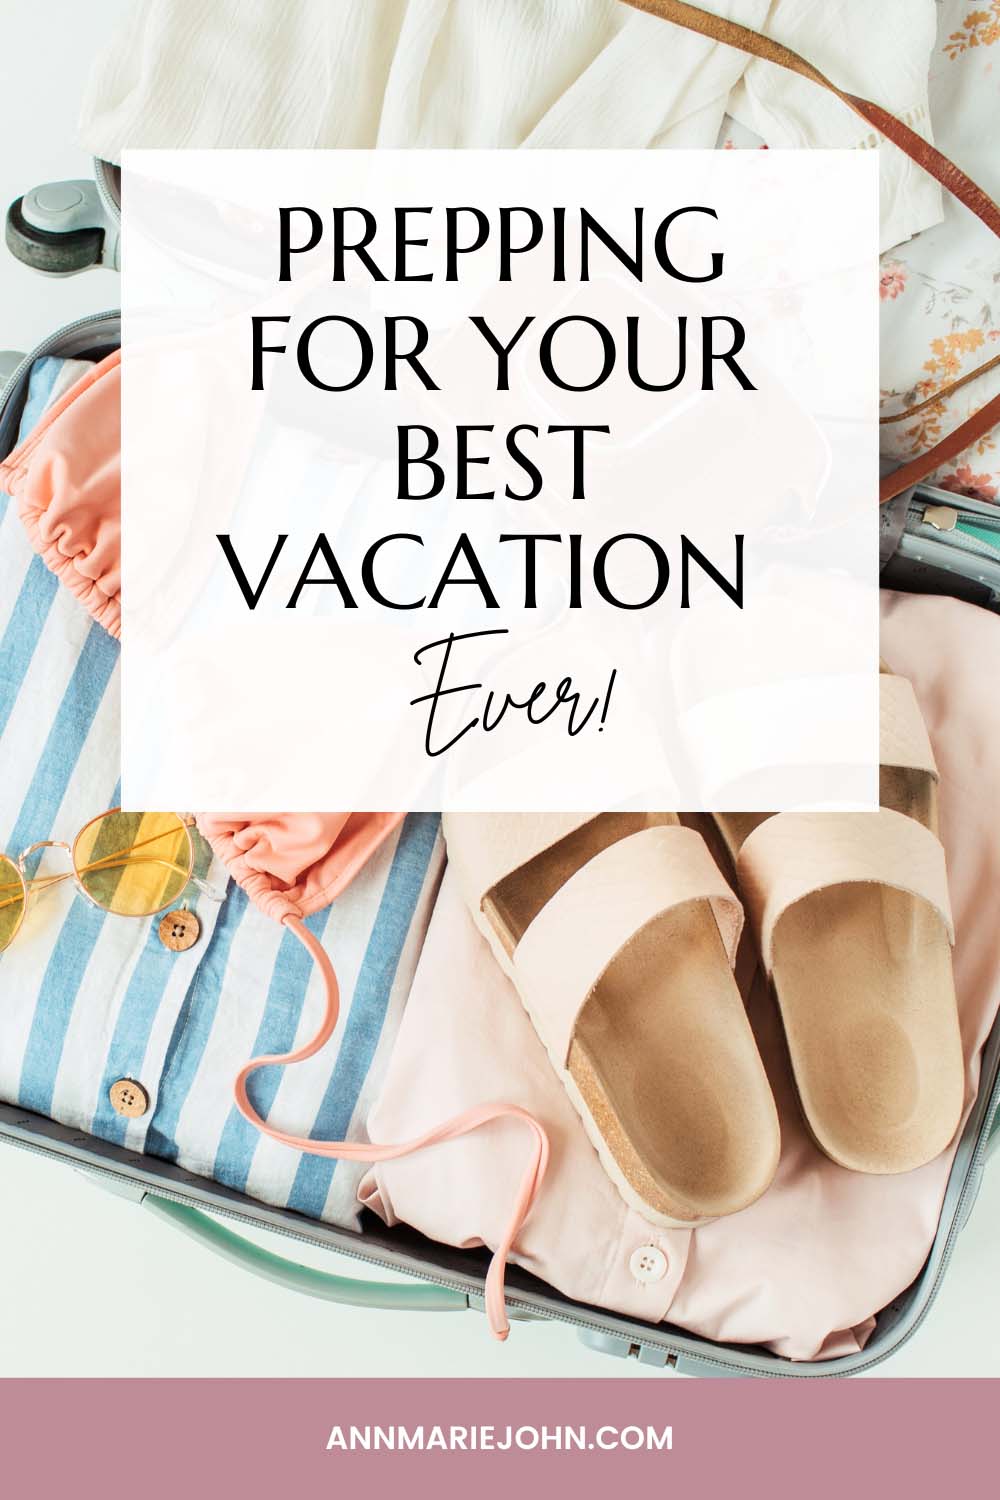 Prepping for Your Best Vacation Ever